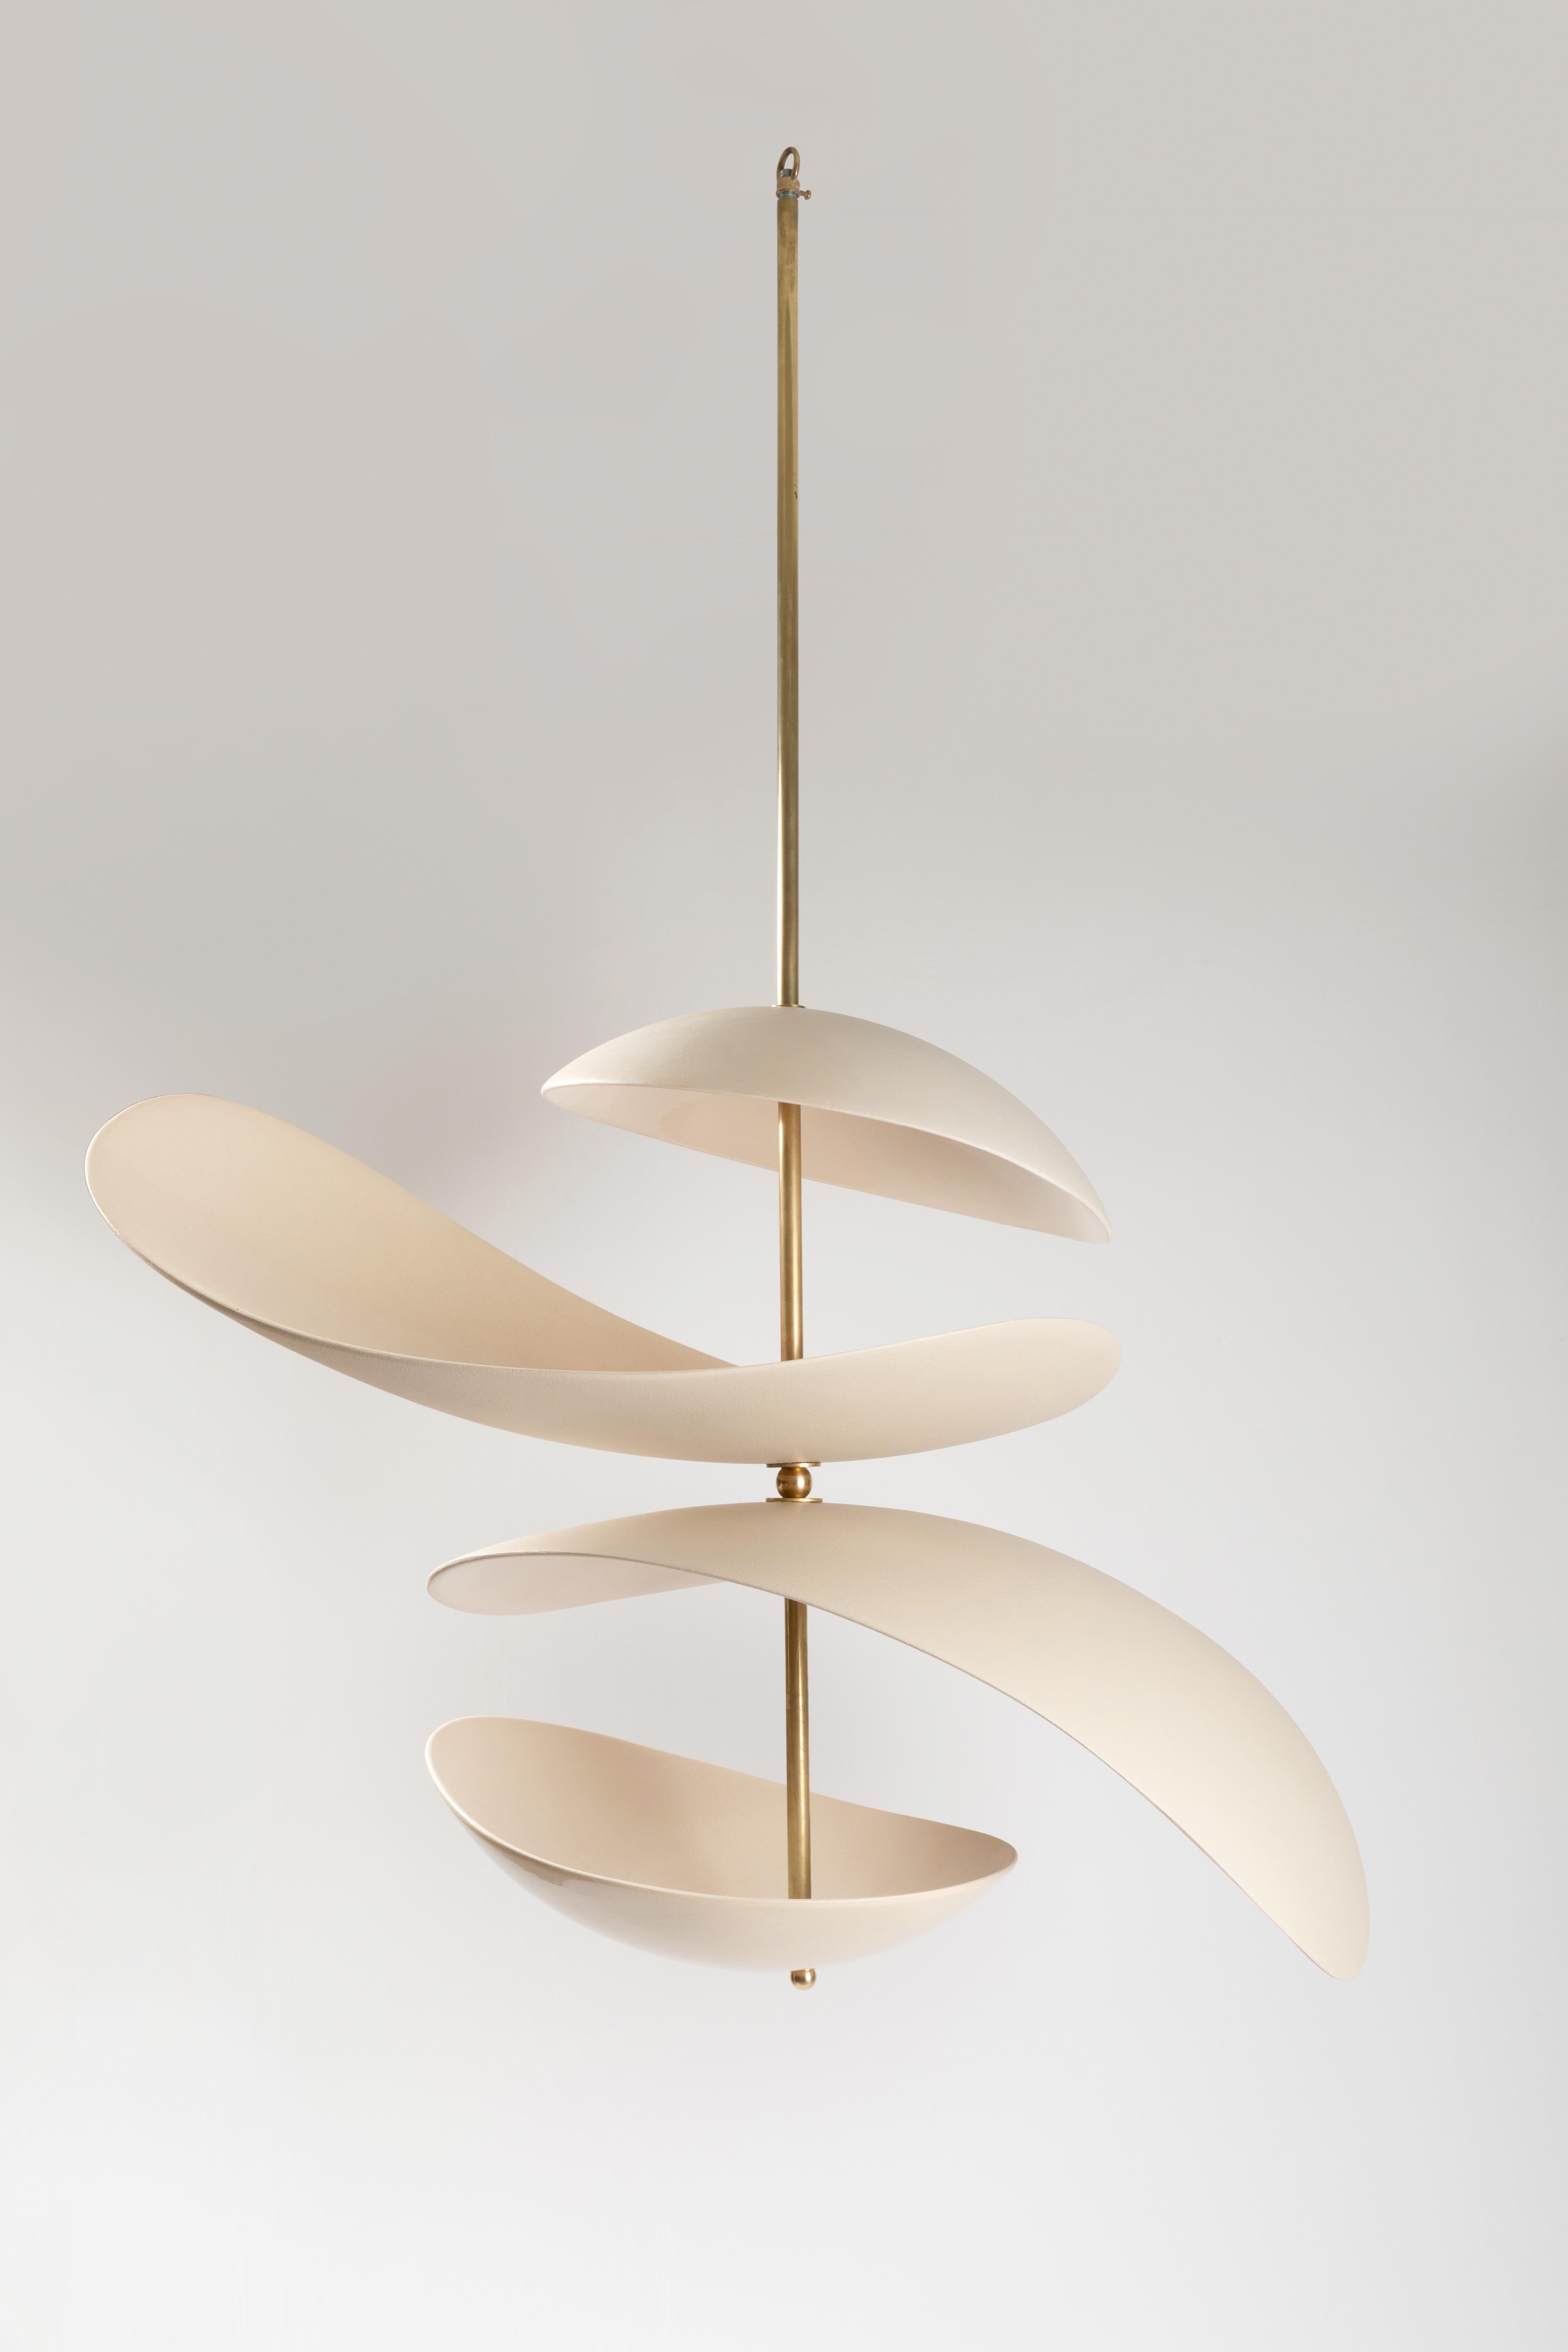 Selene Pendant Lamp XL by Elsa Foulon
Unique piece.
Dimensions: Ø 85/90 x H 55/60 cm.
Materials: Ceramic and brass.

Dimensions may vary. Please contact us.

All our lamps can be wired according to each country. If sold to the USA it will be